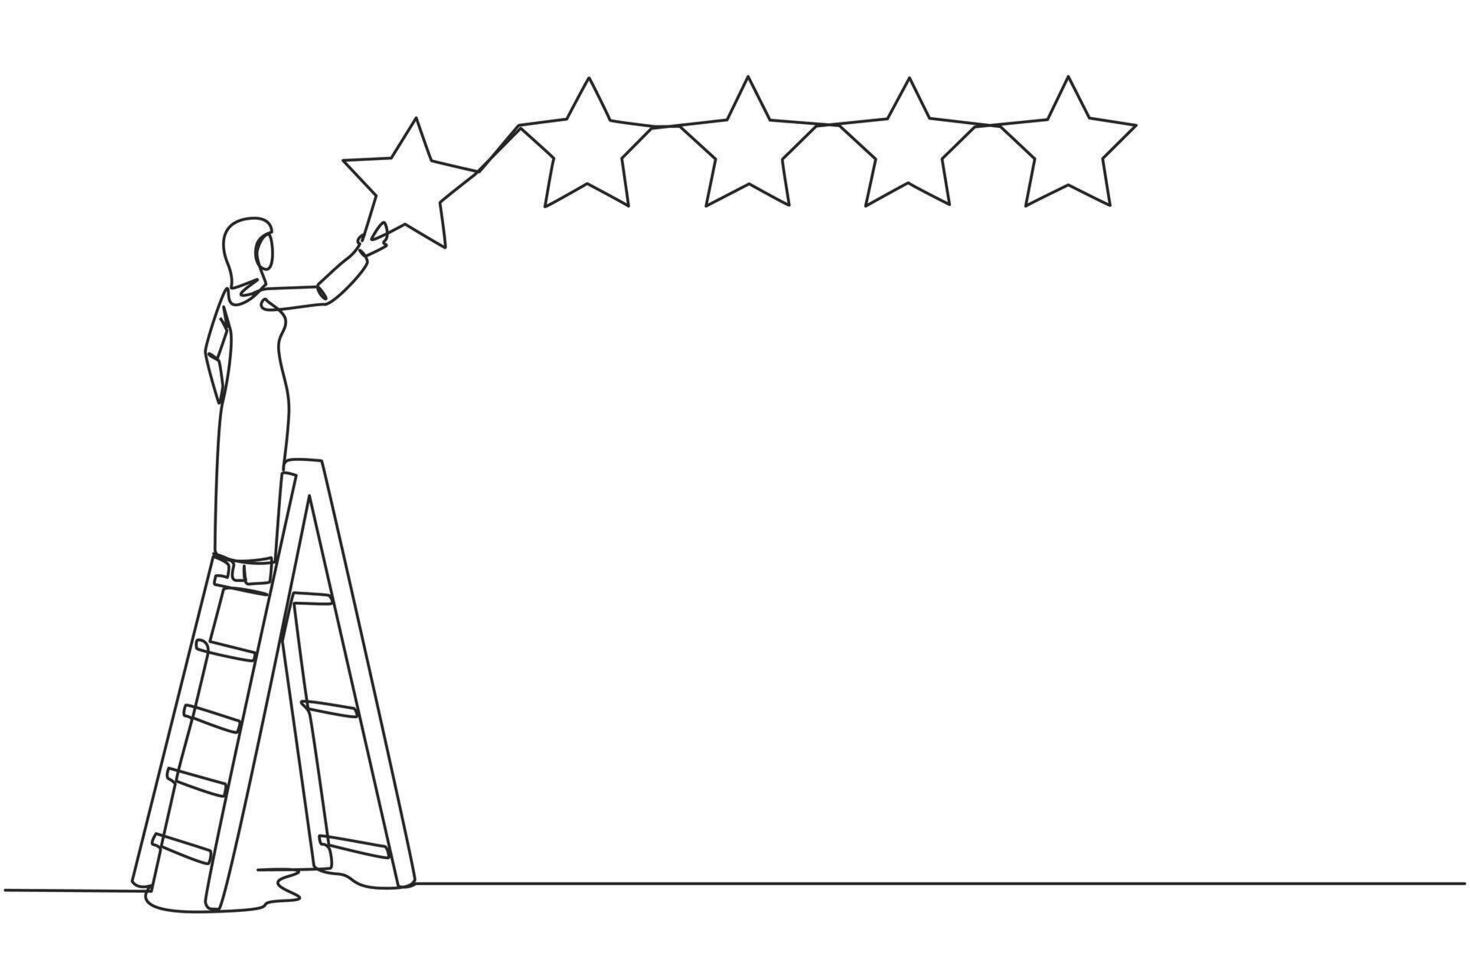 Continuous one line drawing young energetic Arabian woman climbs ladder carry 1 star, making it 5 stars in row. Give very good recommendation to the seller. Single line draw design vector illustration